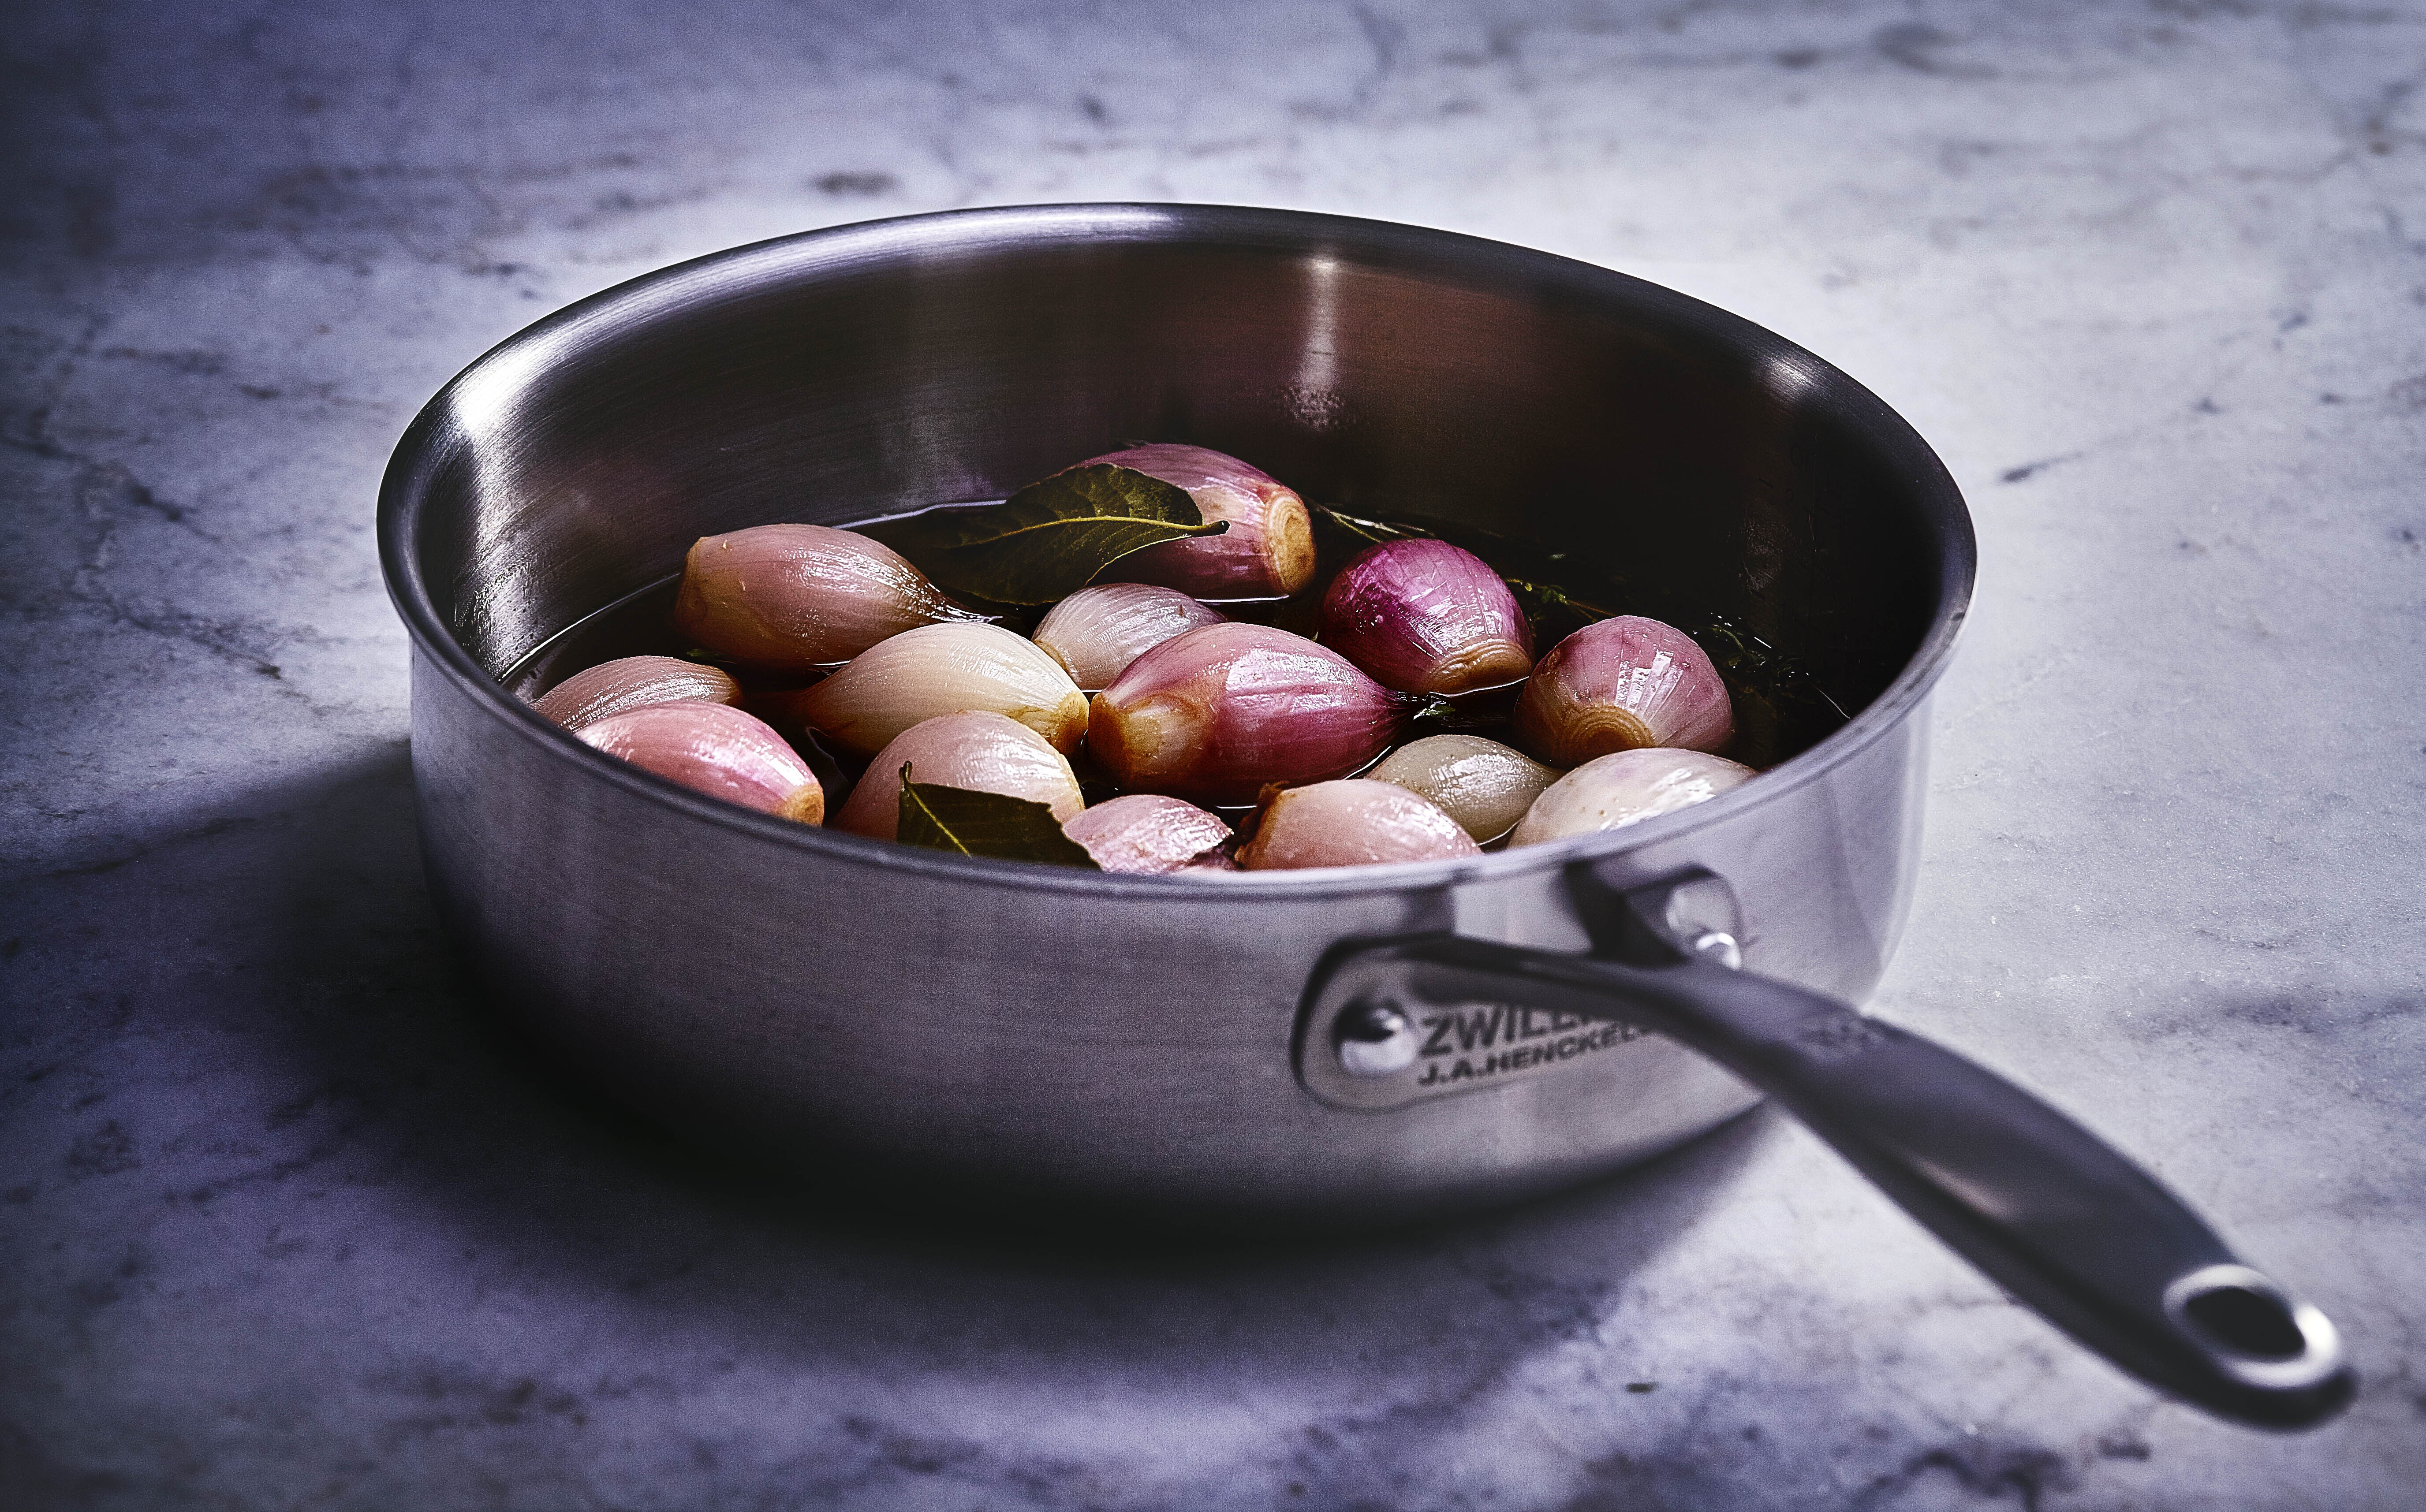 5 Reasons To Include Tasty Shallots In Your Diet